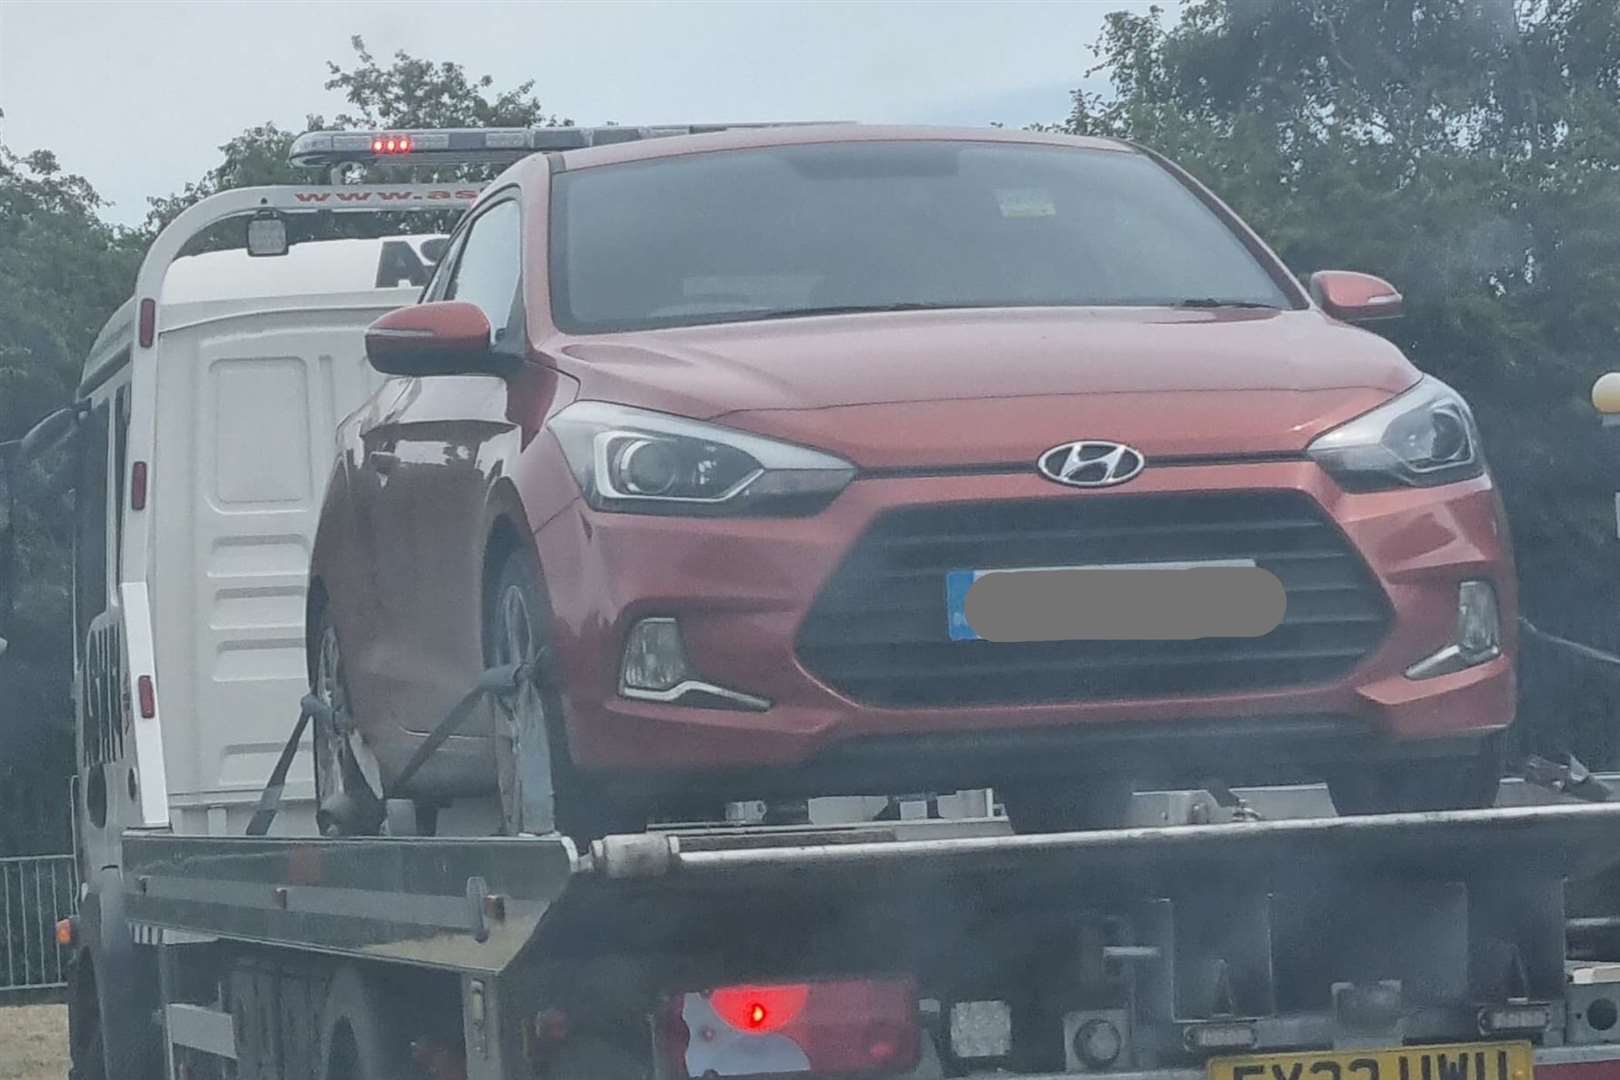 The Hyundai was later found abandoned and returned to its owner